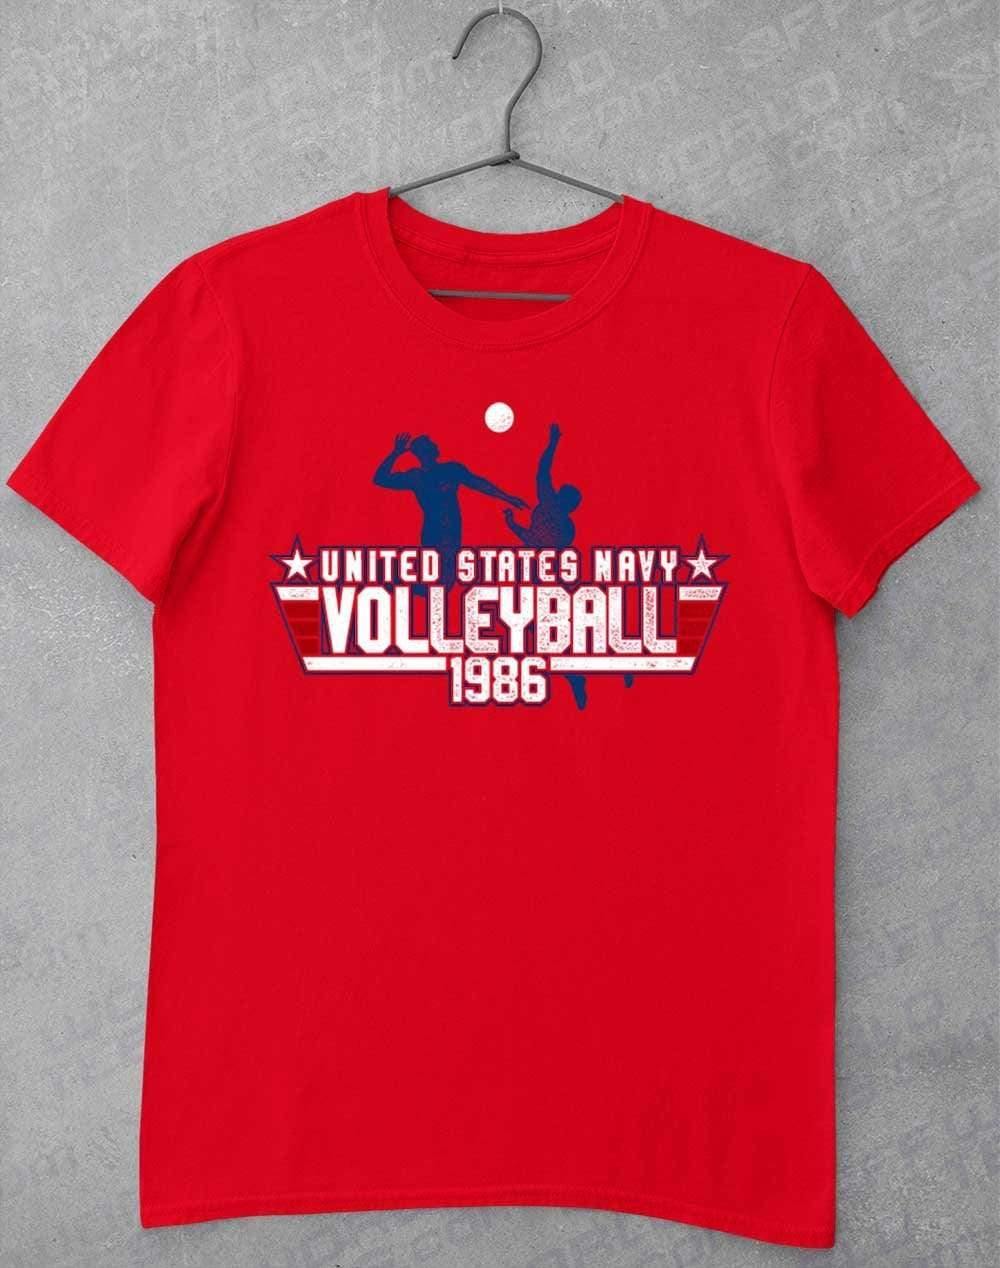 US Navy Volleyball 1986 T-Shirt S / Red  - Off World Tees